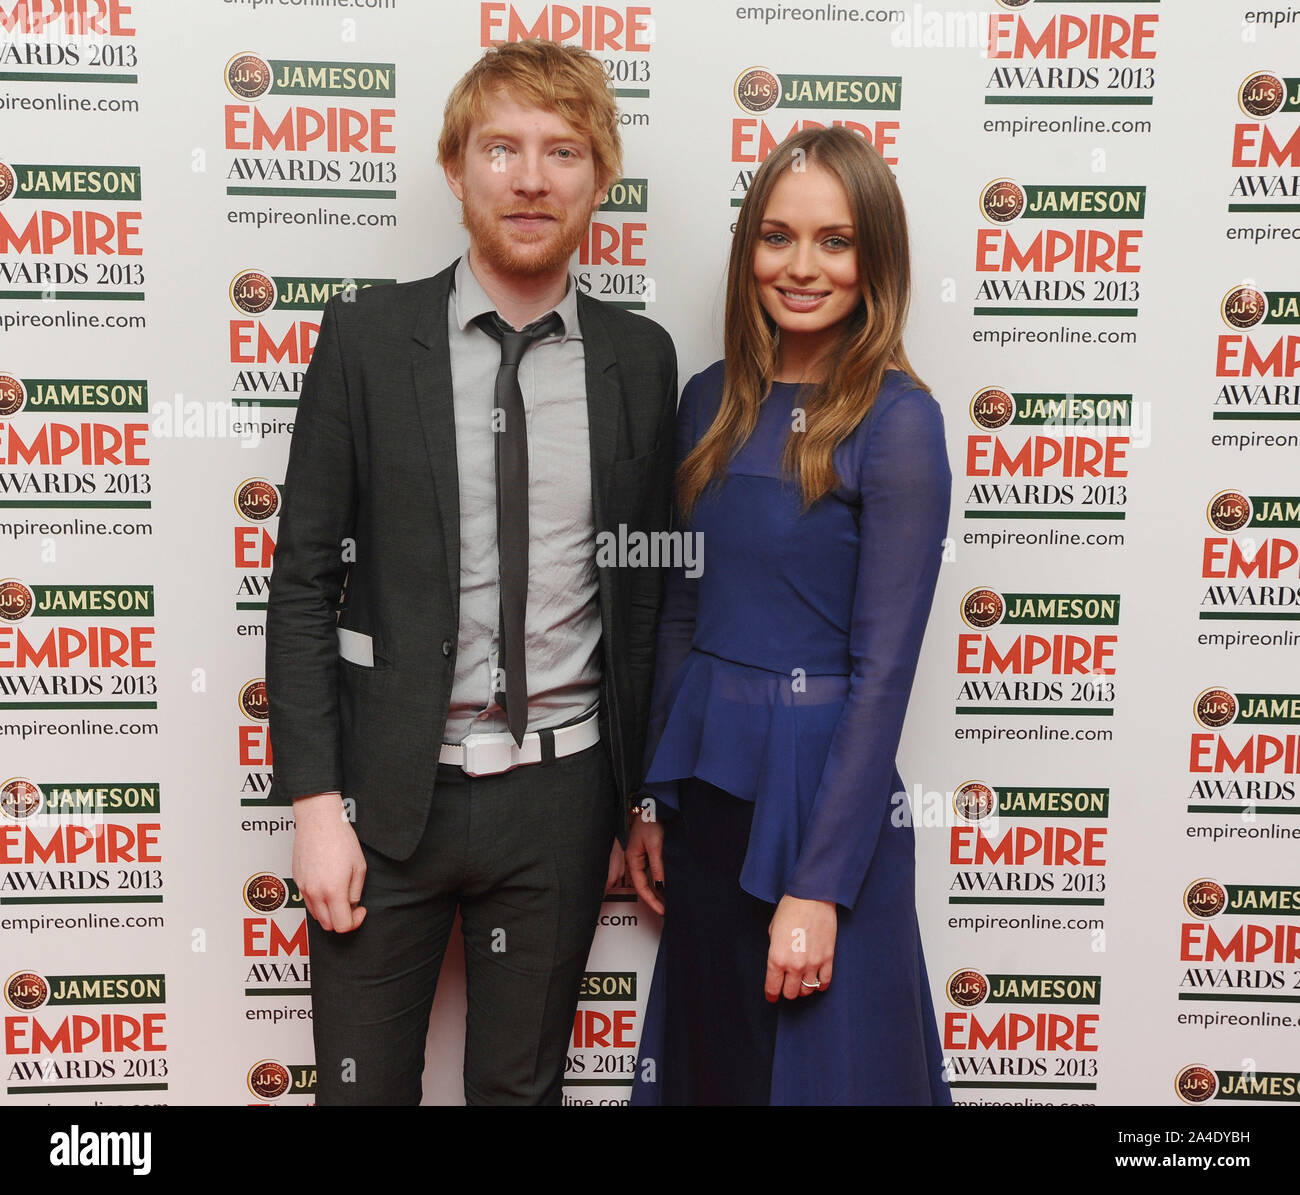 Photo Must Be Credited ©Kate Green/Alpha Press 077037 24/03/2013 Domnhall Gleeson and Laura Haddock at the Jameson Empire Film Awards 2013 held at the Grosvenor Hotel in London Stock Photo